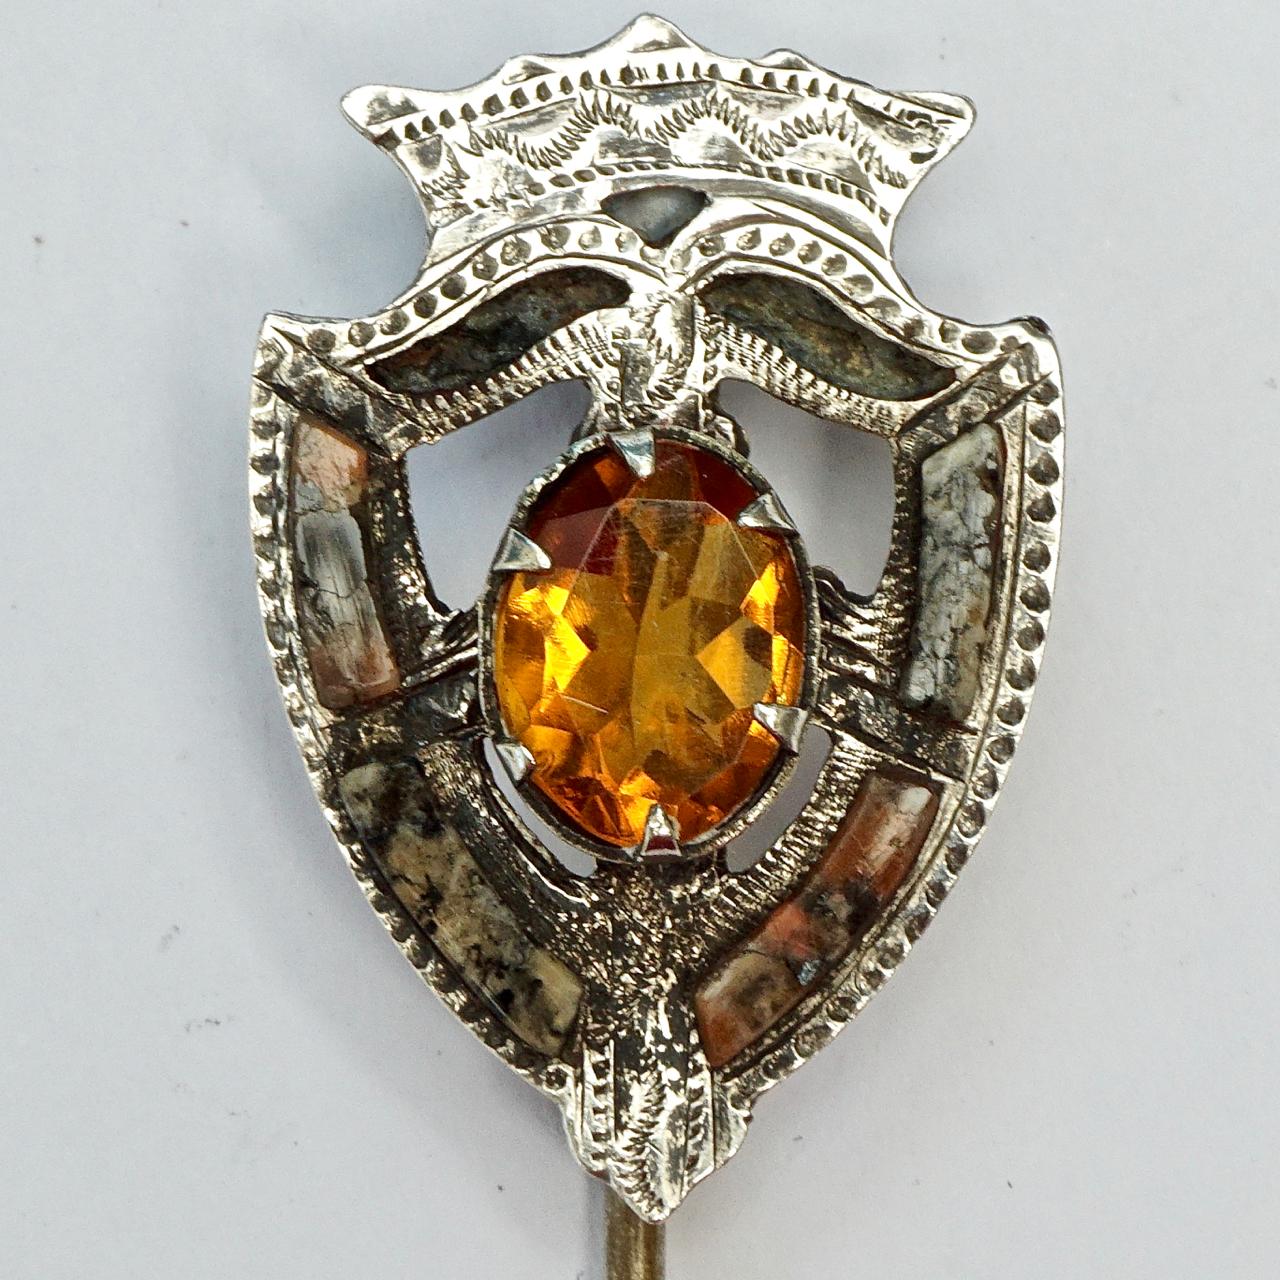 Wonderful Scottish antique Victorian silver tone shield and crown stick pin, featuring a lovely agate and faux citrine design. Measuring length 2.7 cm / 1 inch by width 1.8 cm / .7 inch. The ridges on the gold tone stick help it to hold on to